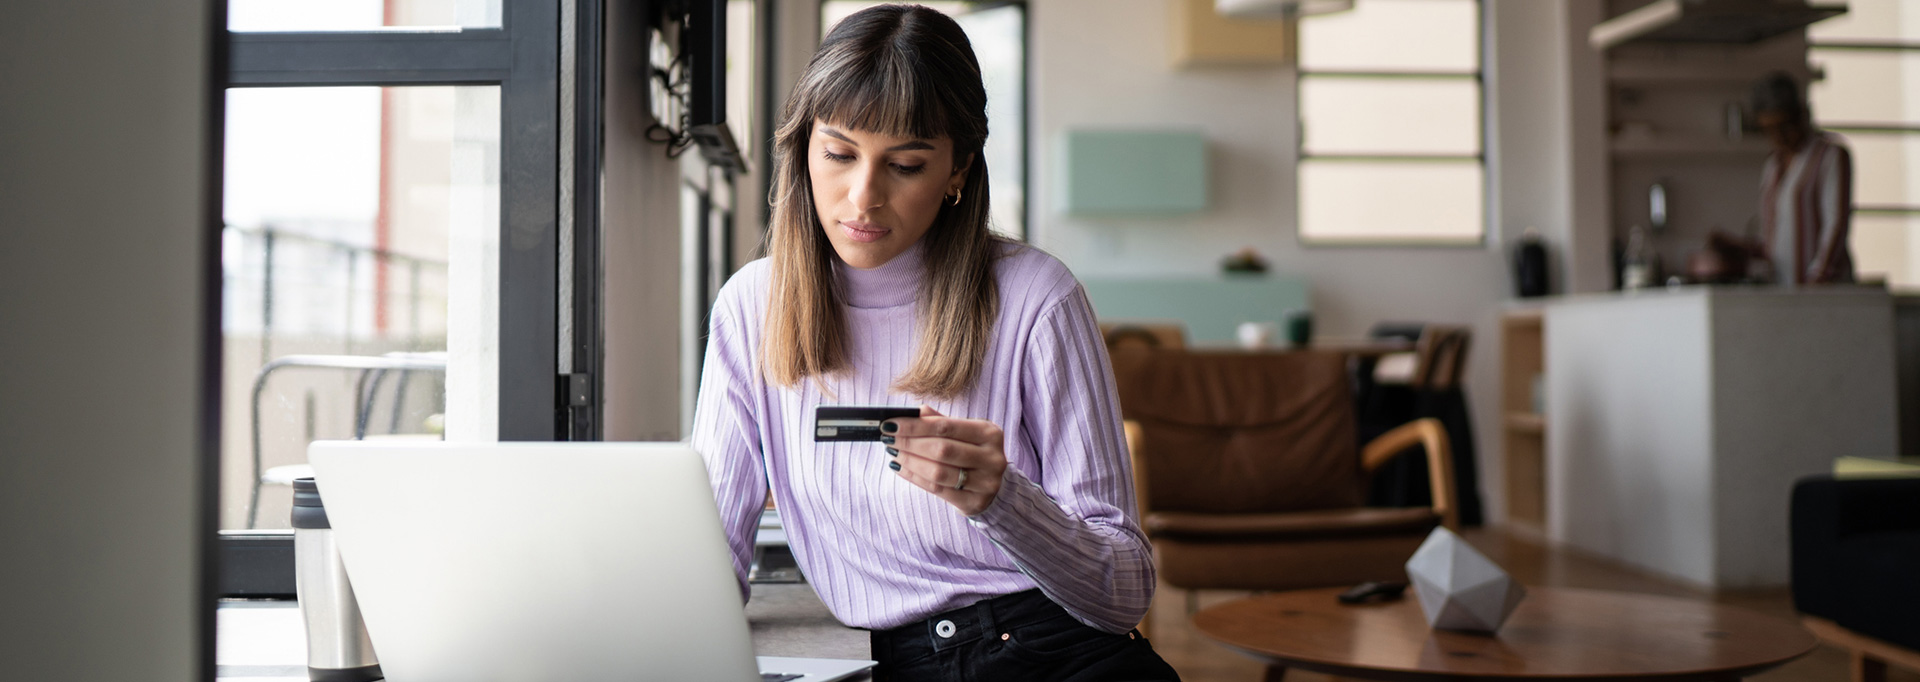 woman on computer with credit card